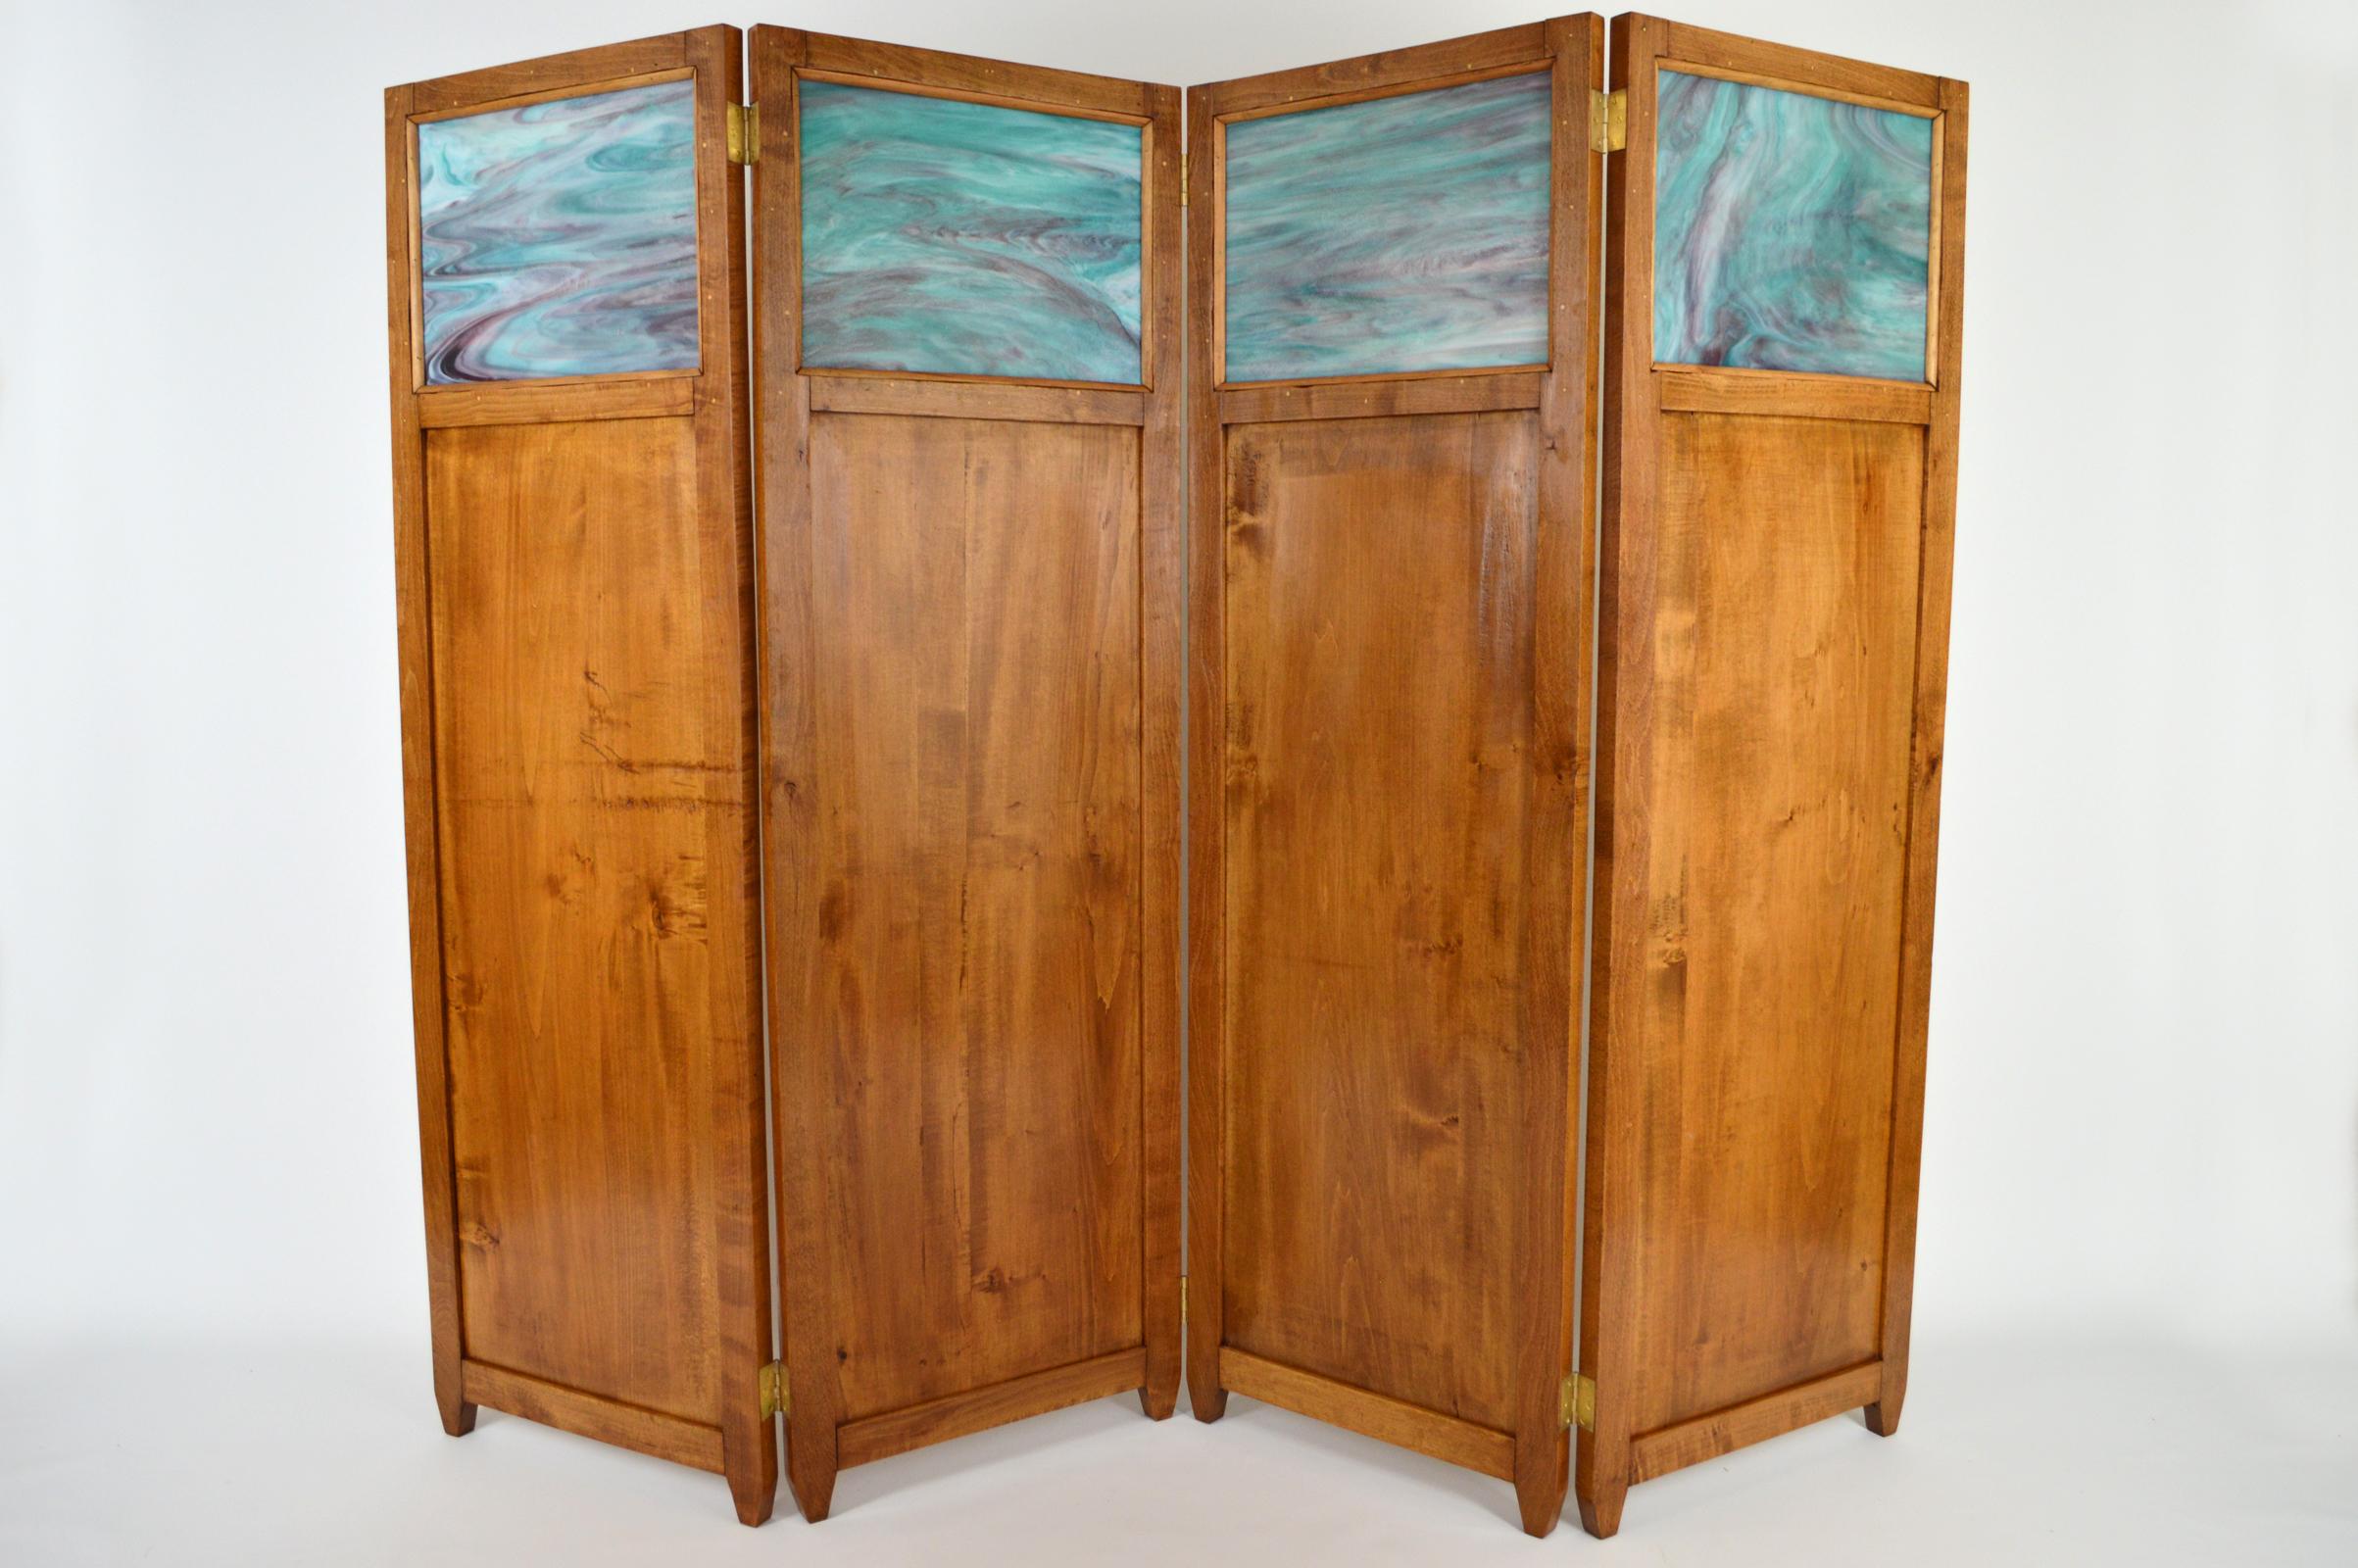 Art Nouveau Four-Panel Folding Screen, Pyrographed Wood & Stained Glass, 1910s For Sale 9